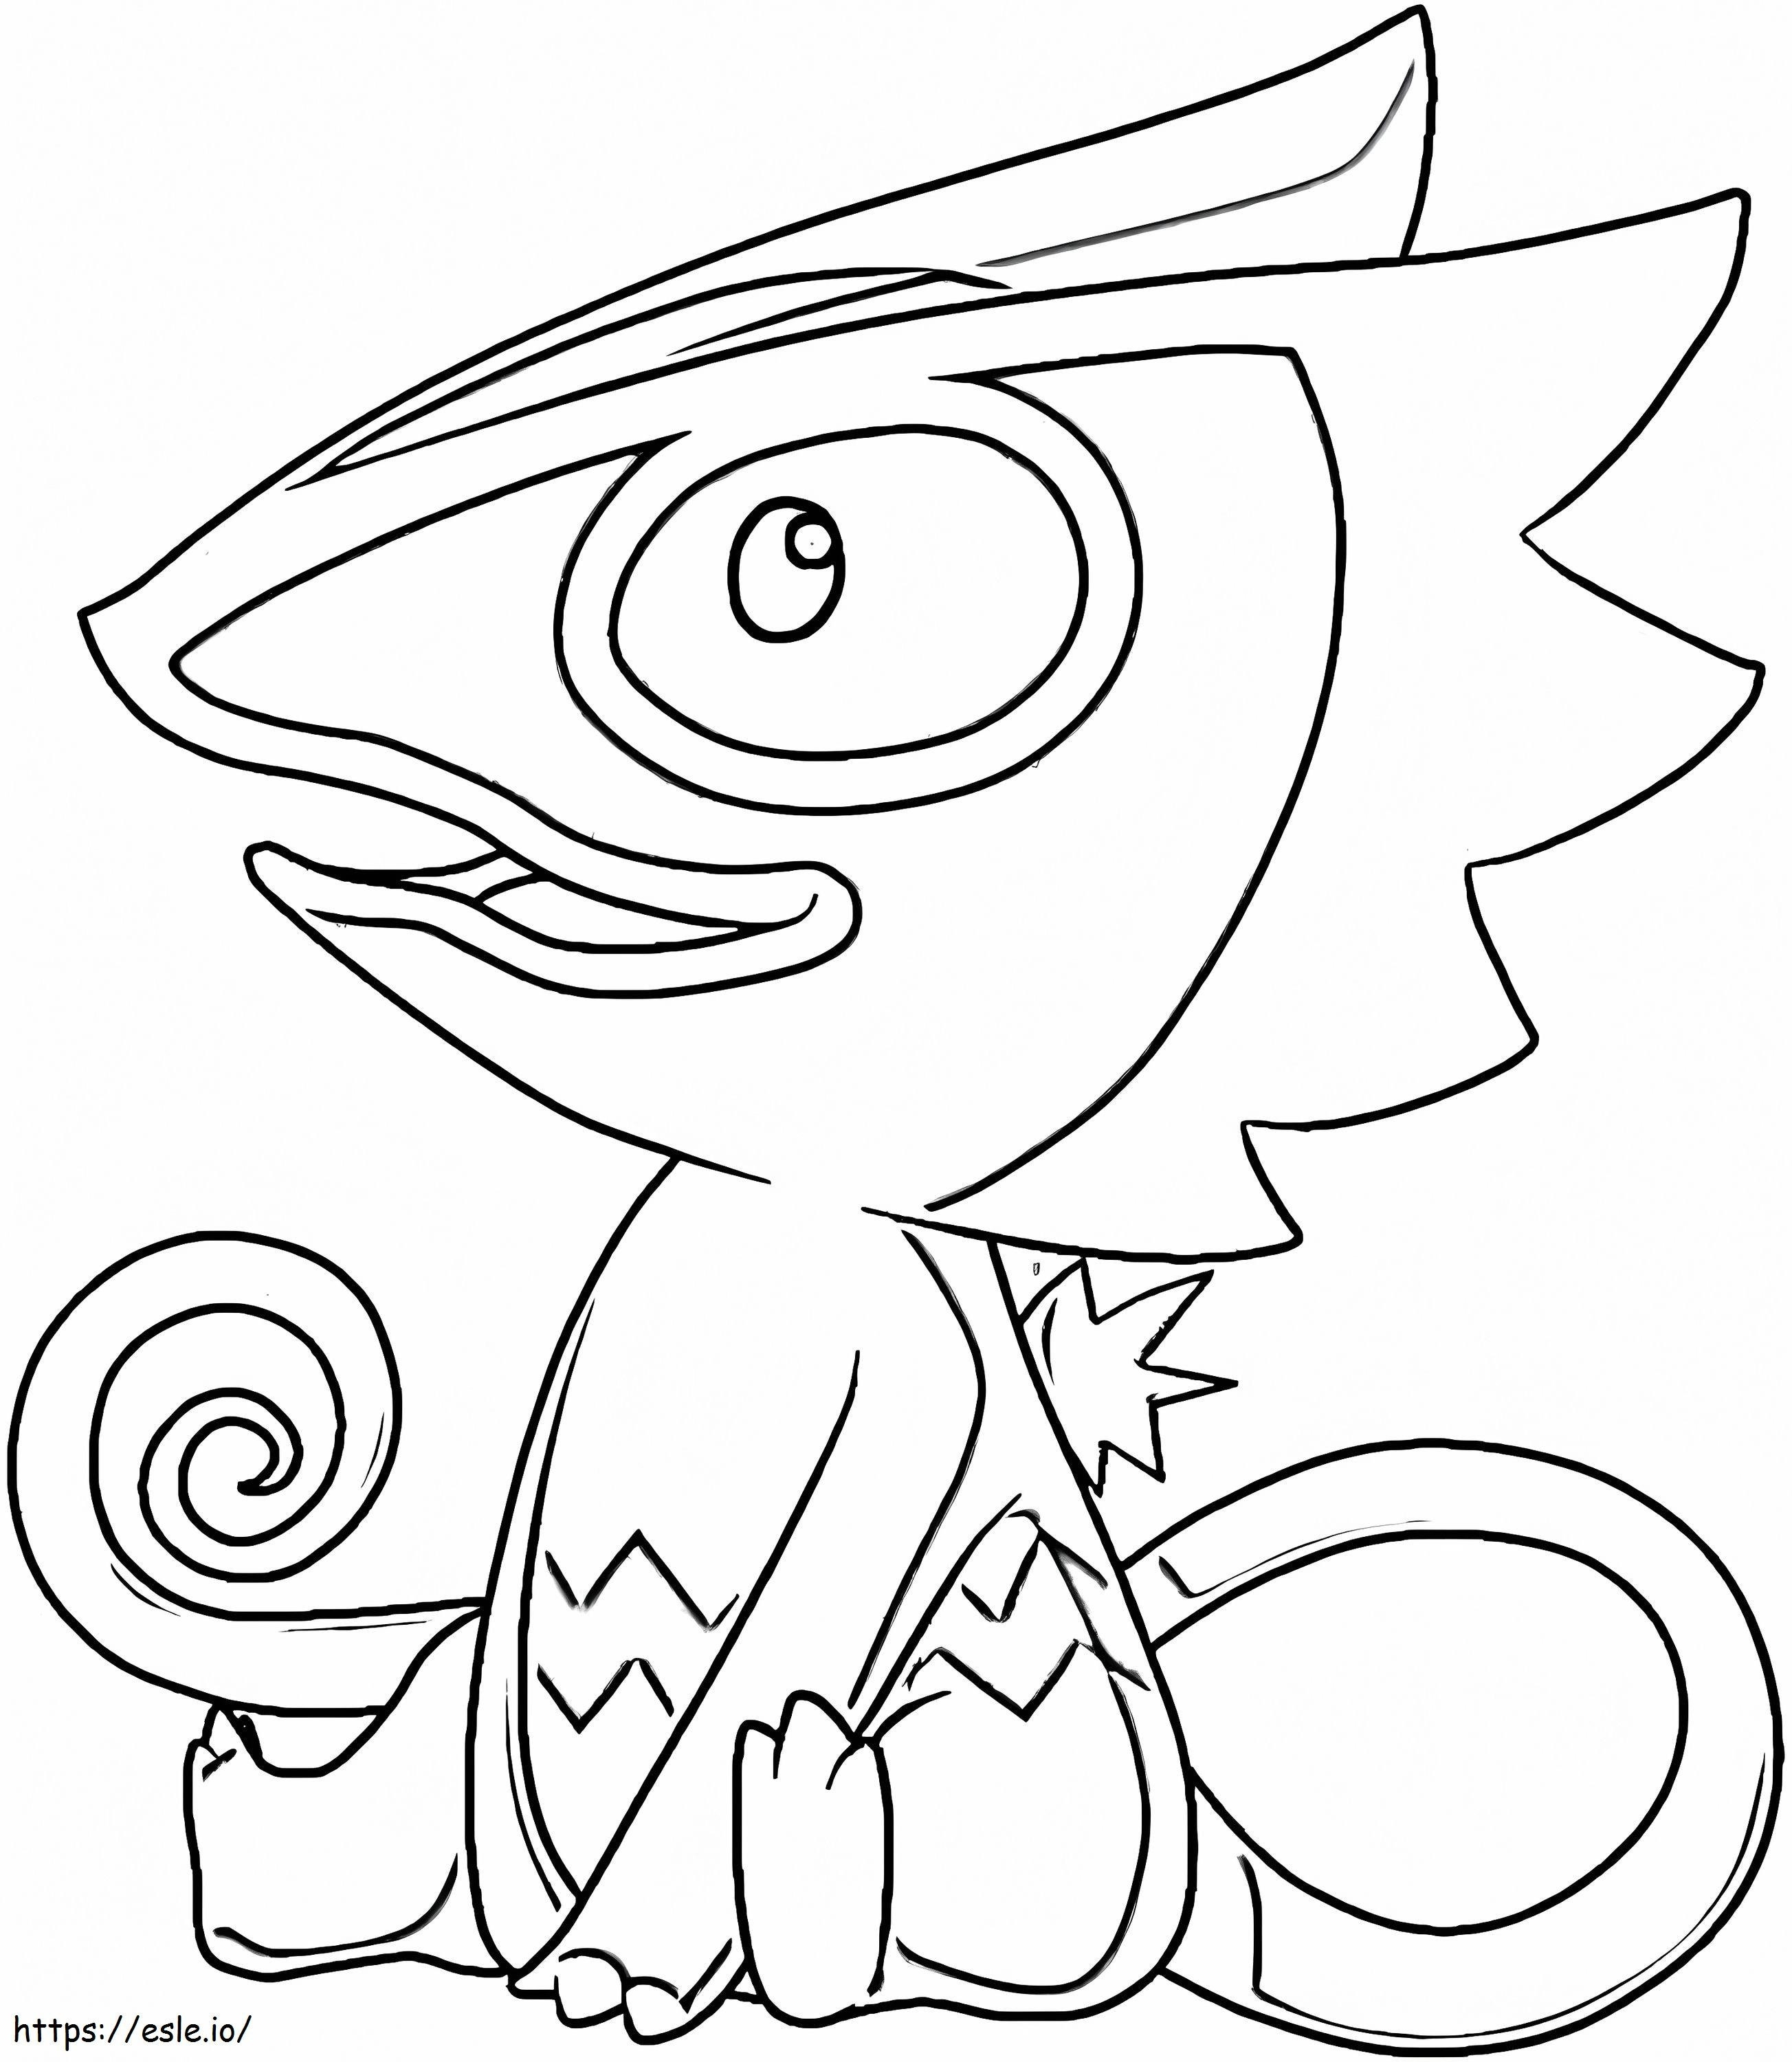 Kecleon 2 coloring page